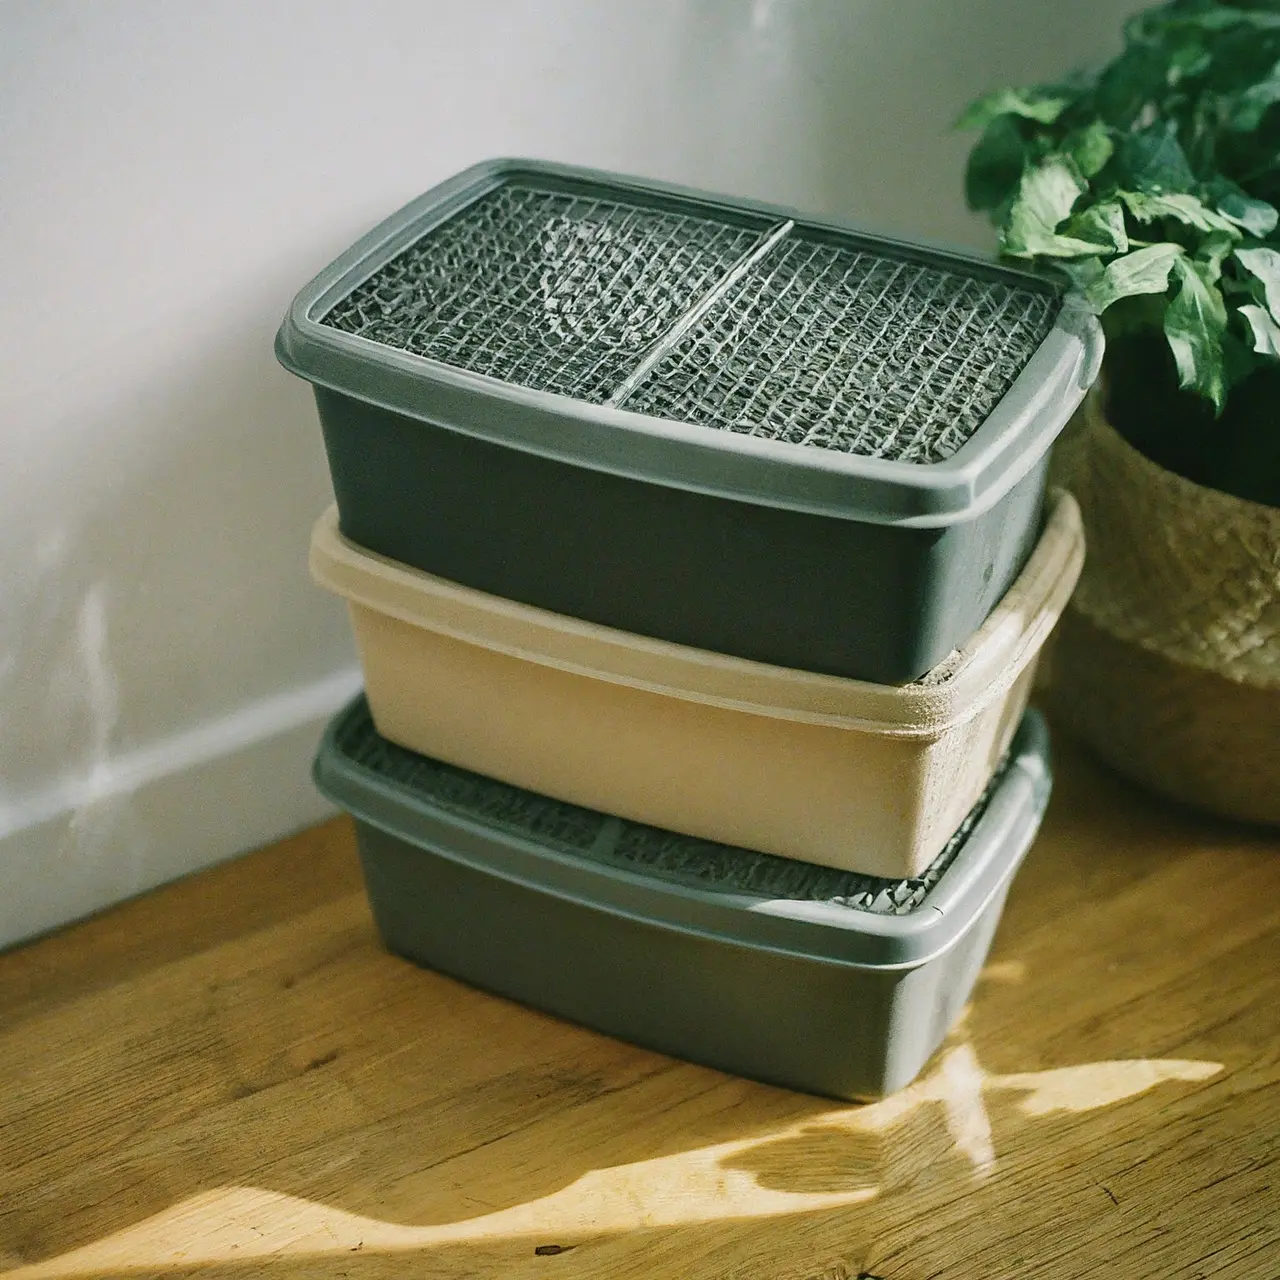 A stack of disposable litter boxes on a wooden floor. 35mm stock photo